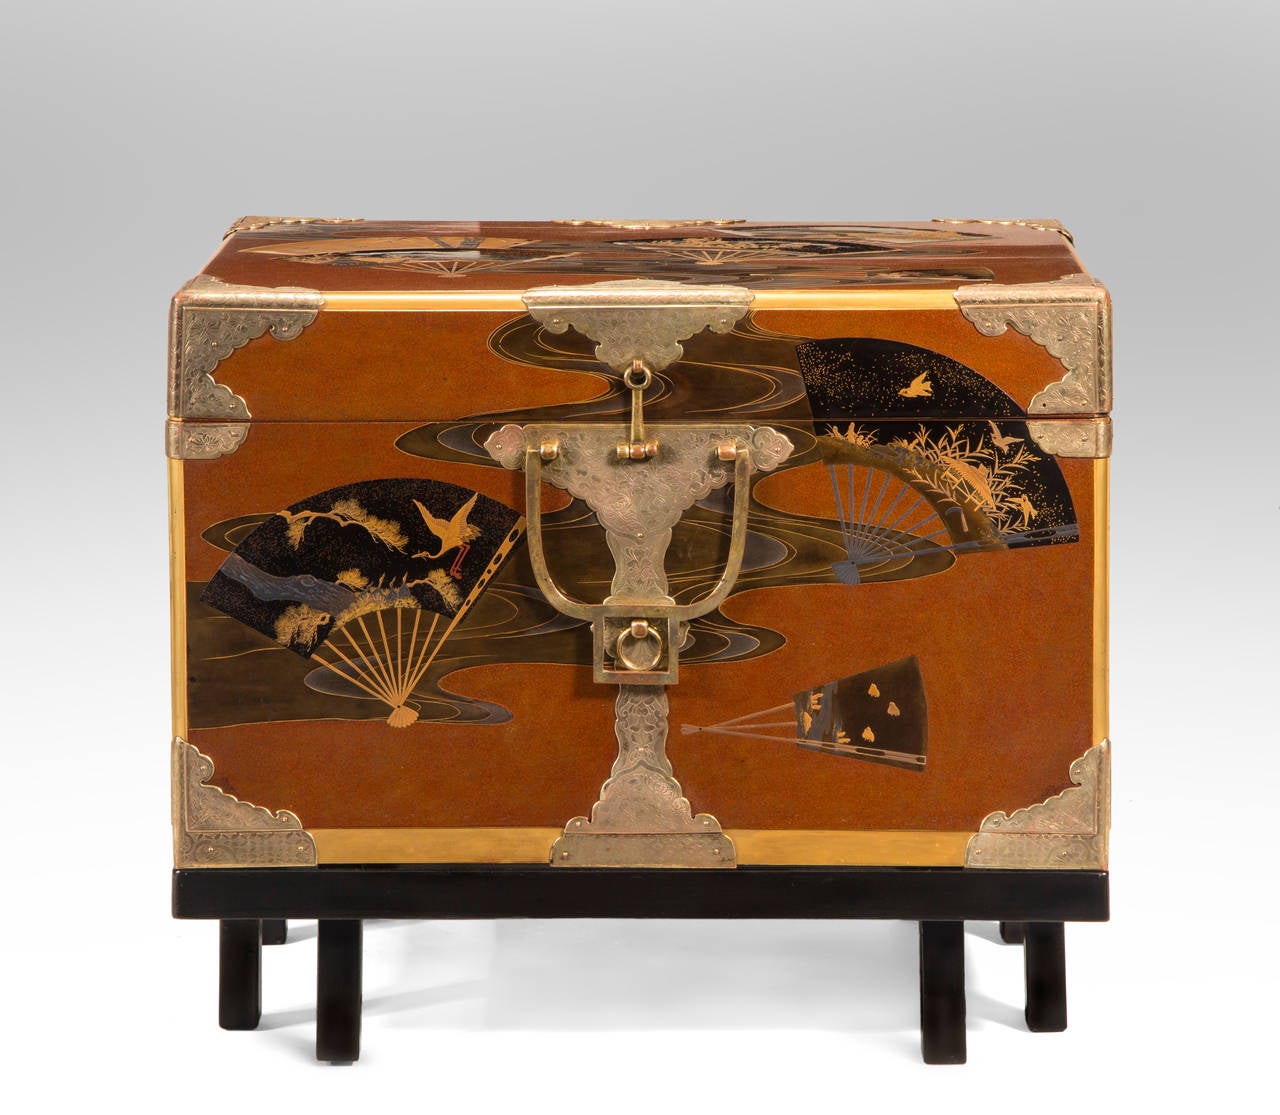 The superb lacquer work adorned with Japanese fans depicting naturalistic worlds and classical motifs including chidori, sparrows, cranes, and butterflies, each fan floating over a meandering stream, the rectangular lid fitted to a conforming base,